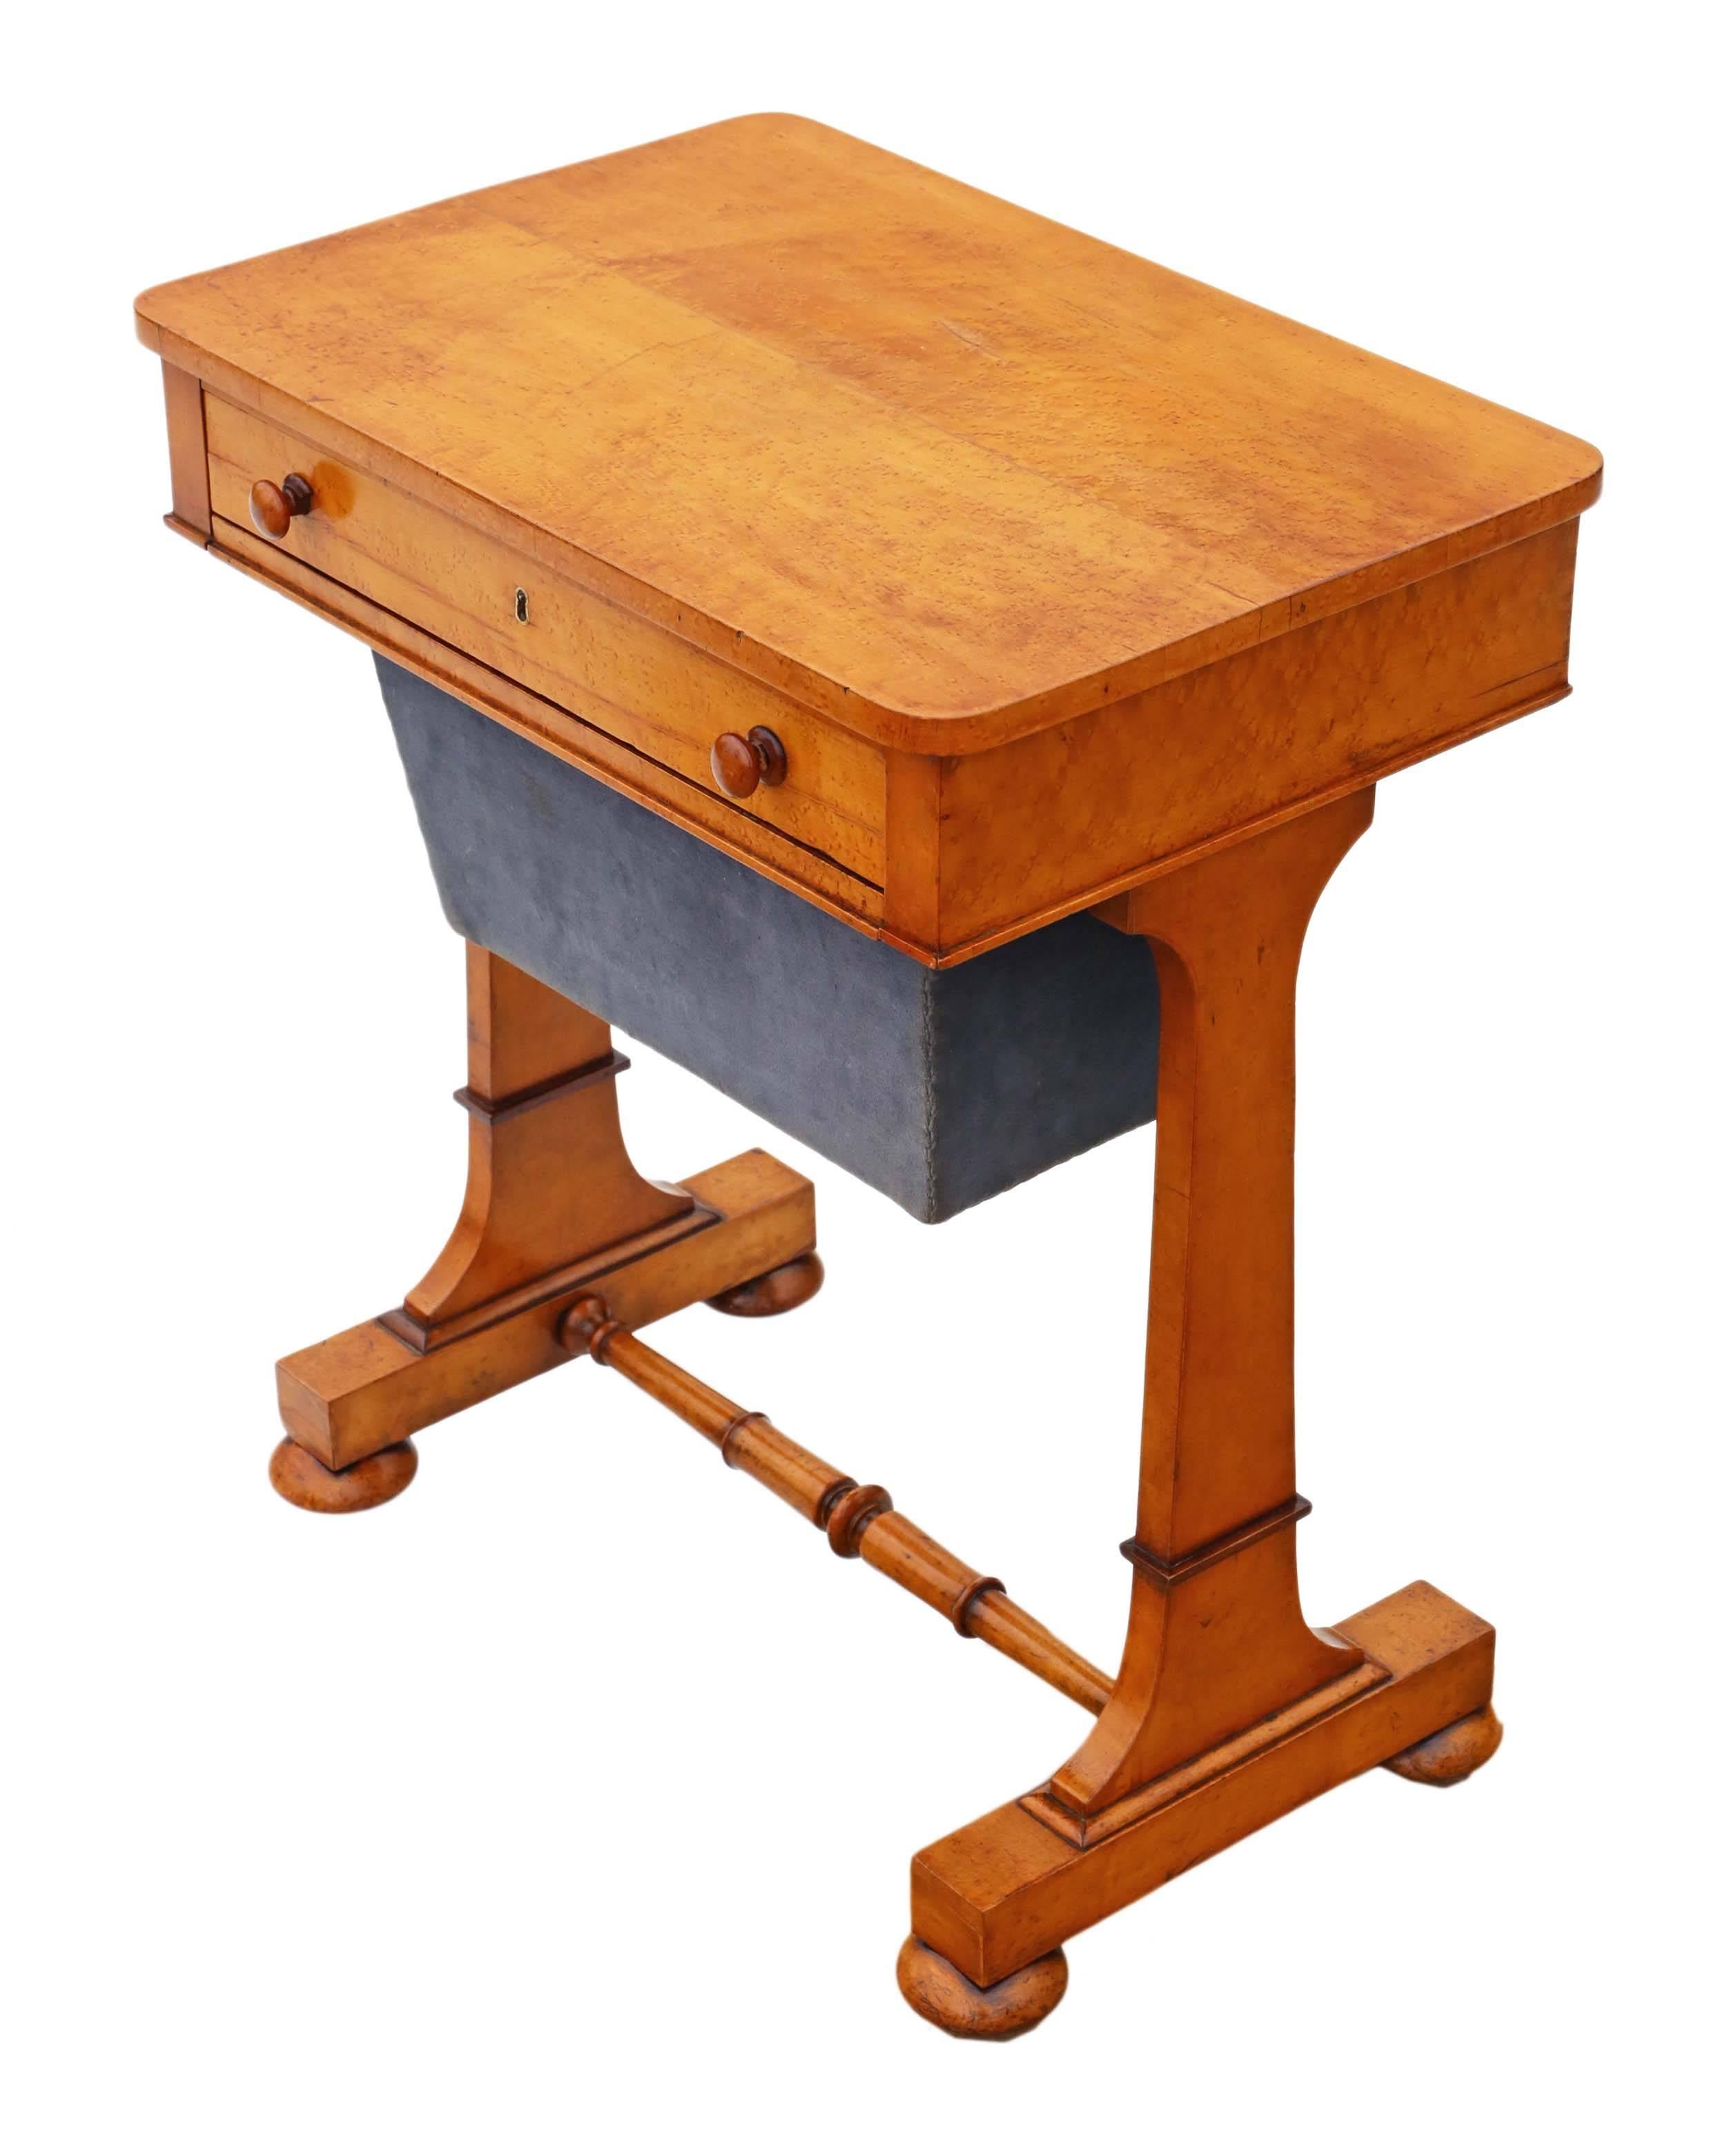 Mid-19th Century Antique William iv circa 1835 Bird's-Eye Maple Work / Sewing Box or Table For Sale